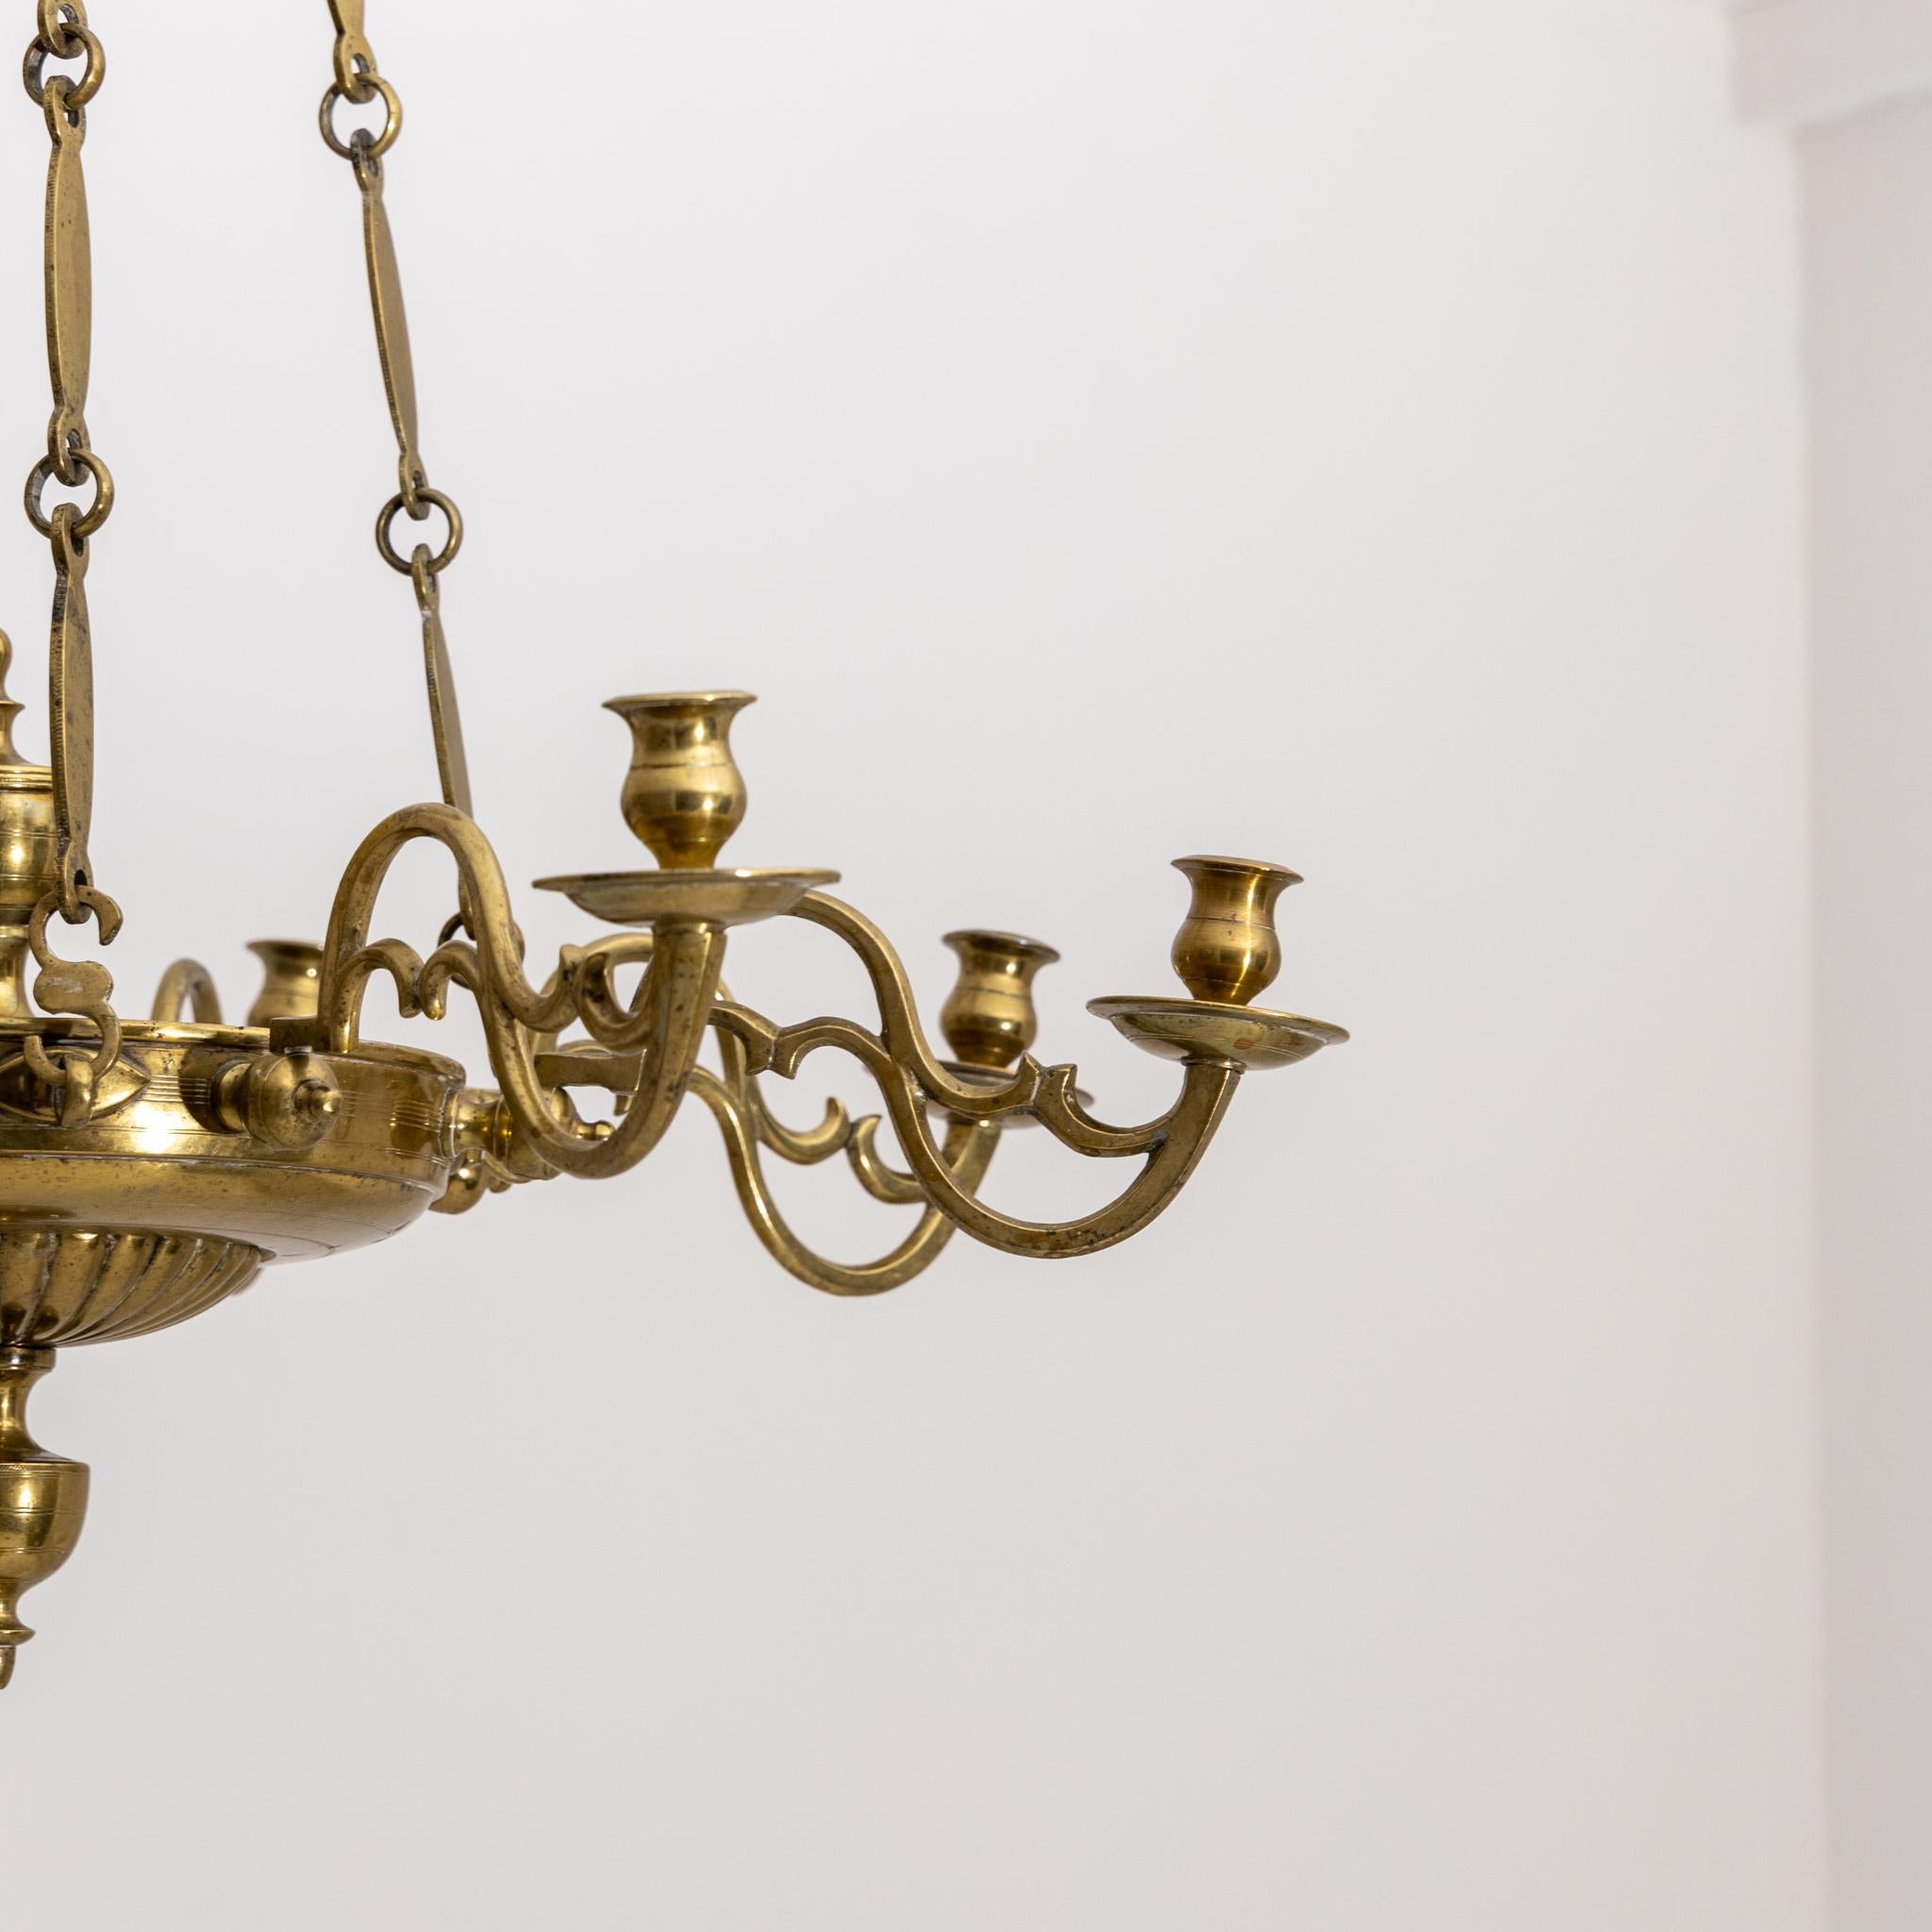 English Brass Chandelier, Probably England, 18th Century